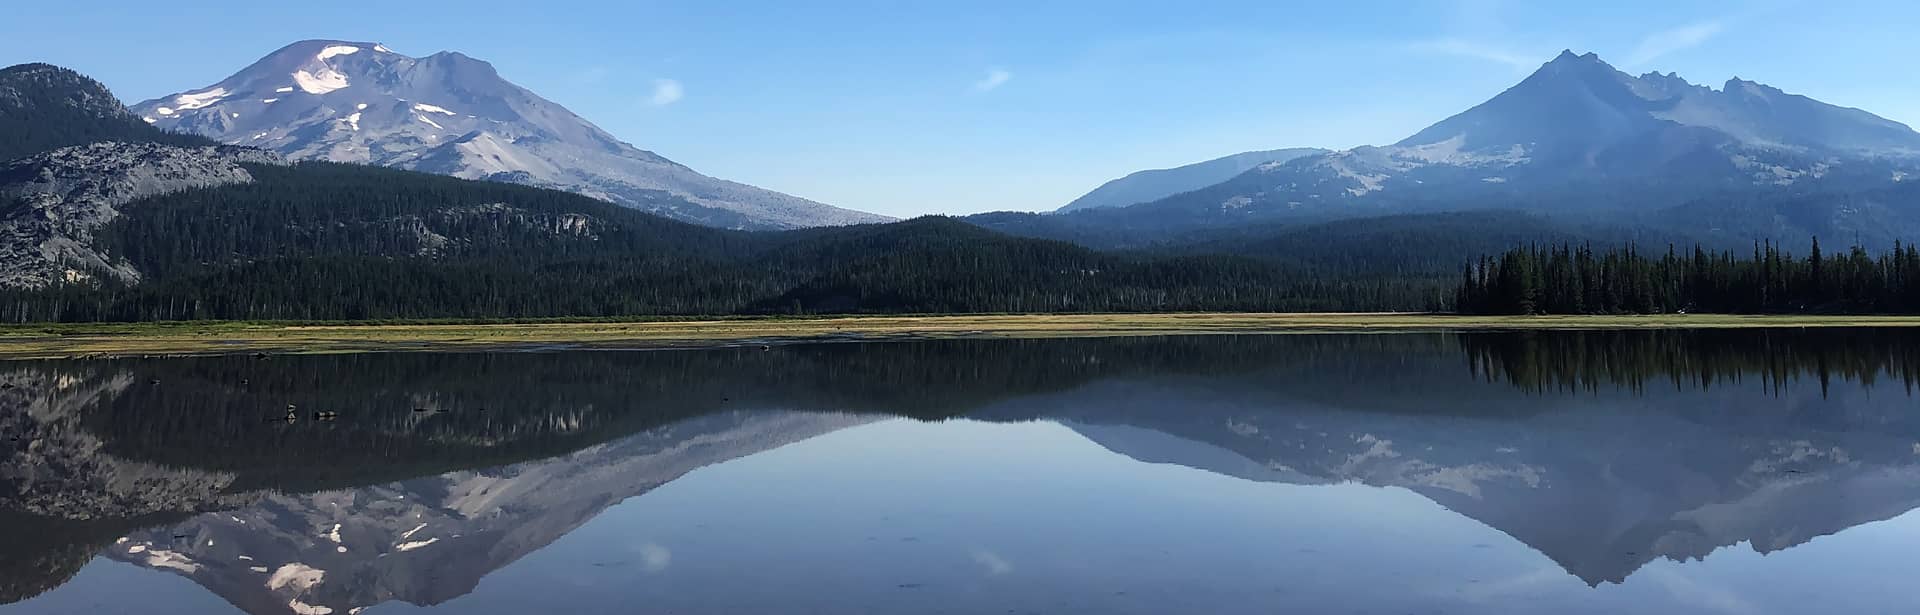 A photo of sparks lake with mountains and reflection in the lake